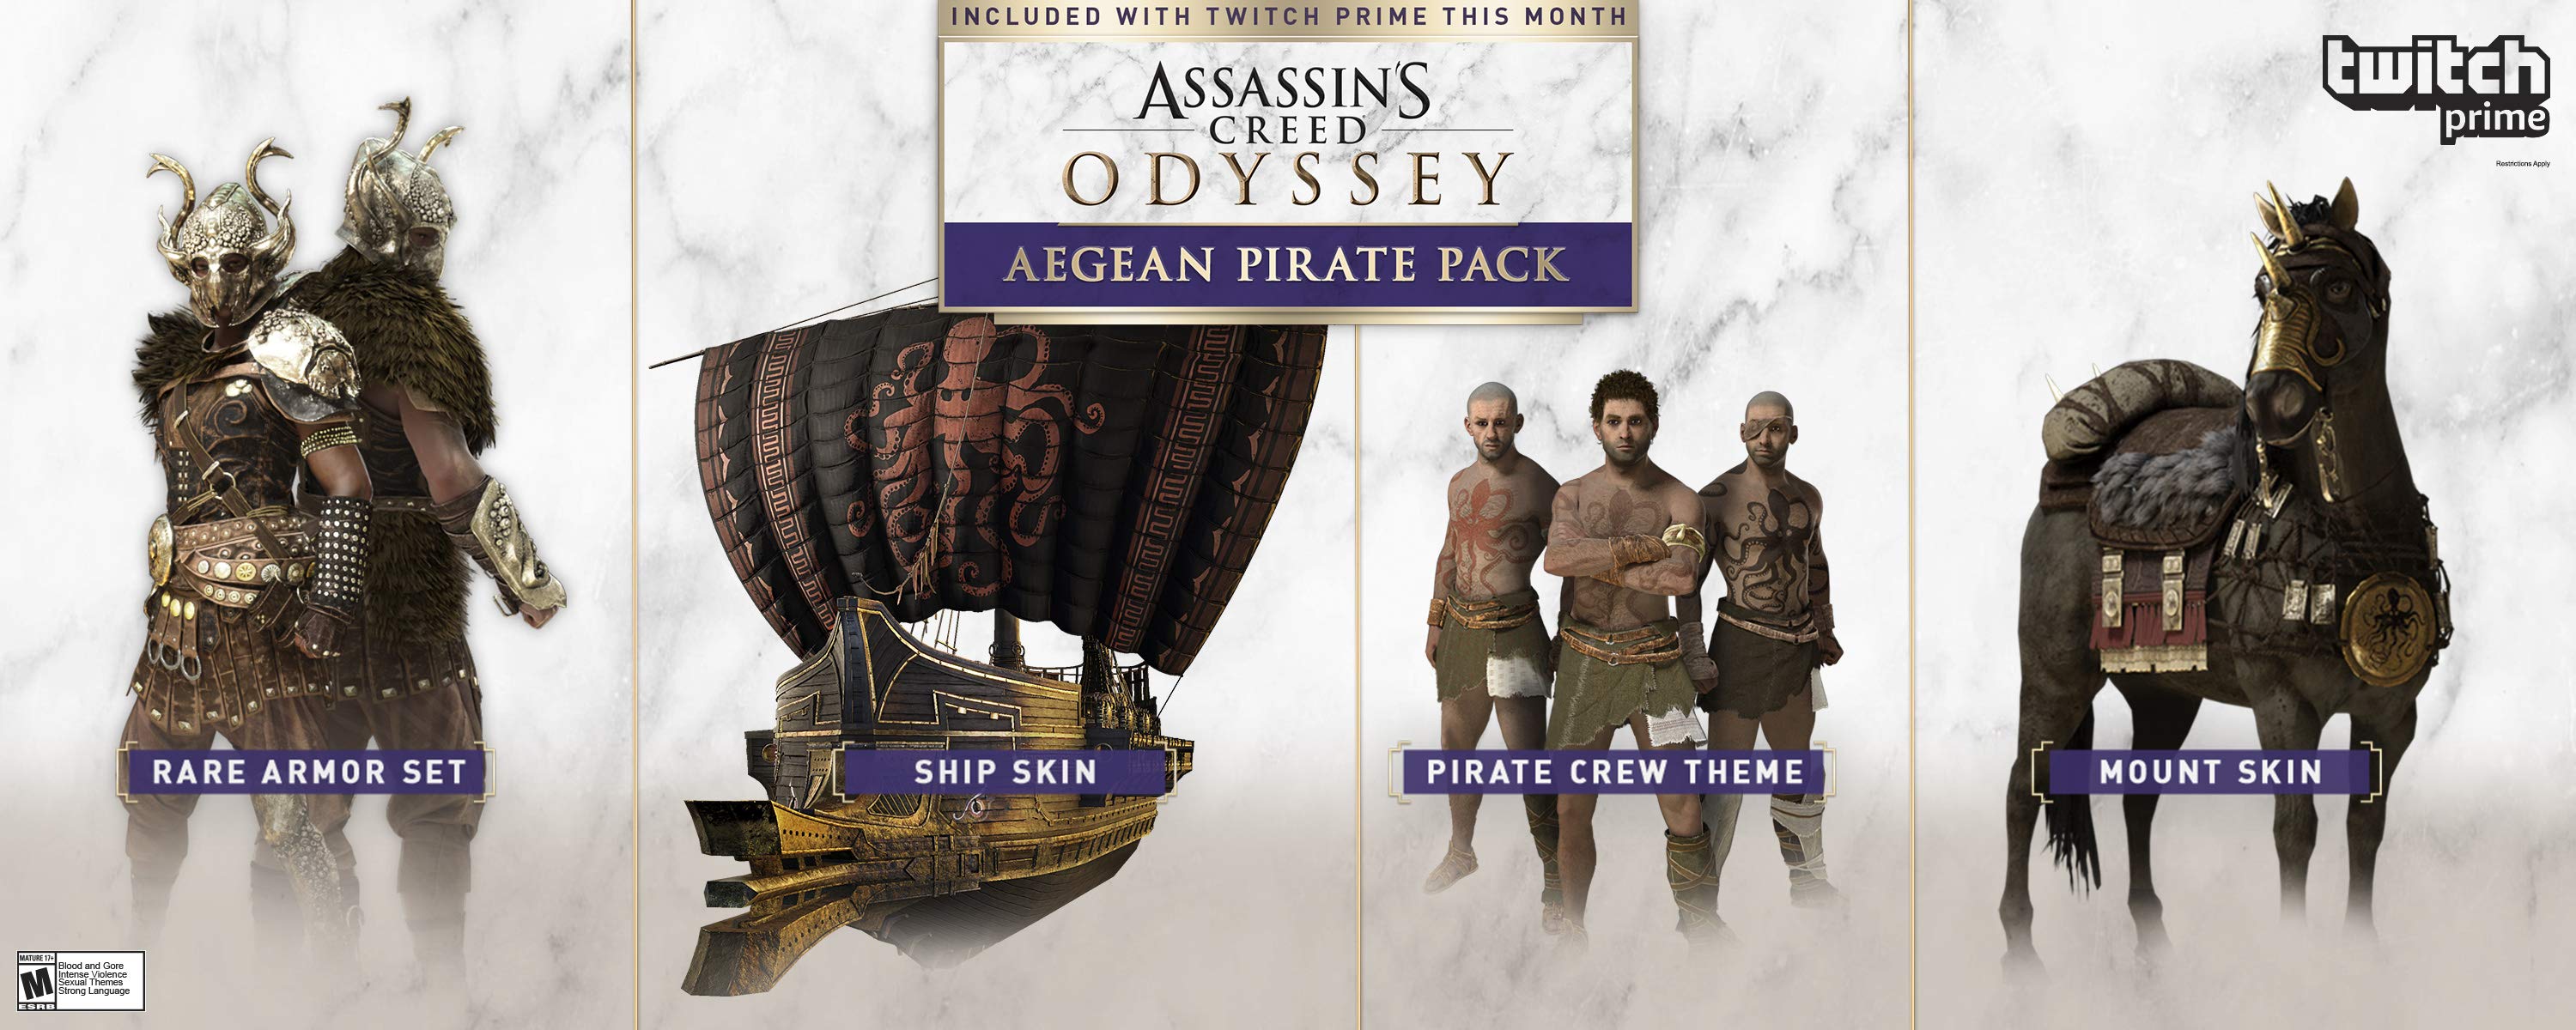 Image for Assassin's Creed Odyssey:  How to get exclusive Twitch skins